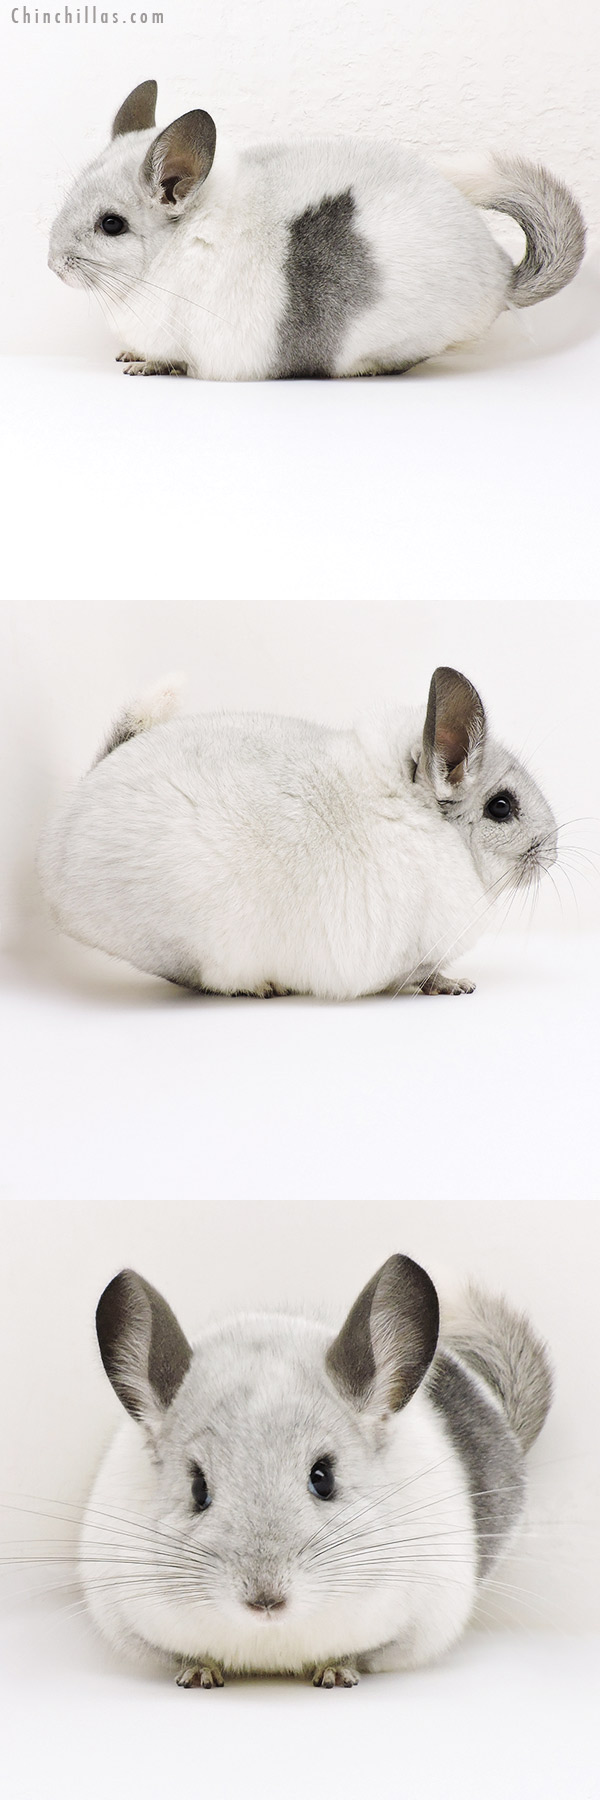 Chinchilla or related item offered for sale or export on Chinchillas.com - 18203 Extra Large Unique White Mosaic ( Locken Carrier ) Female Chinchilla